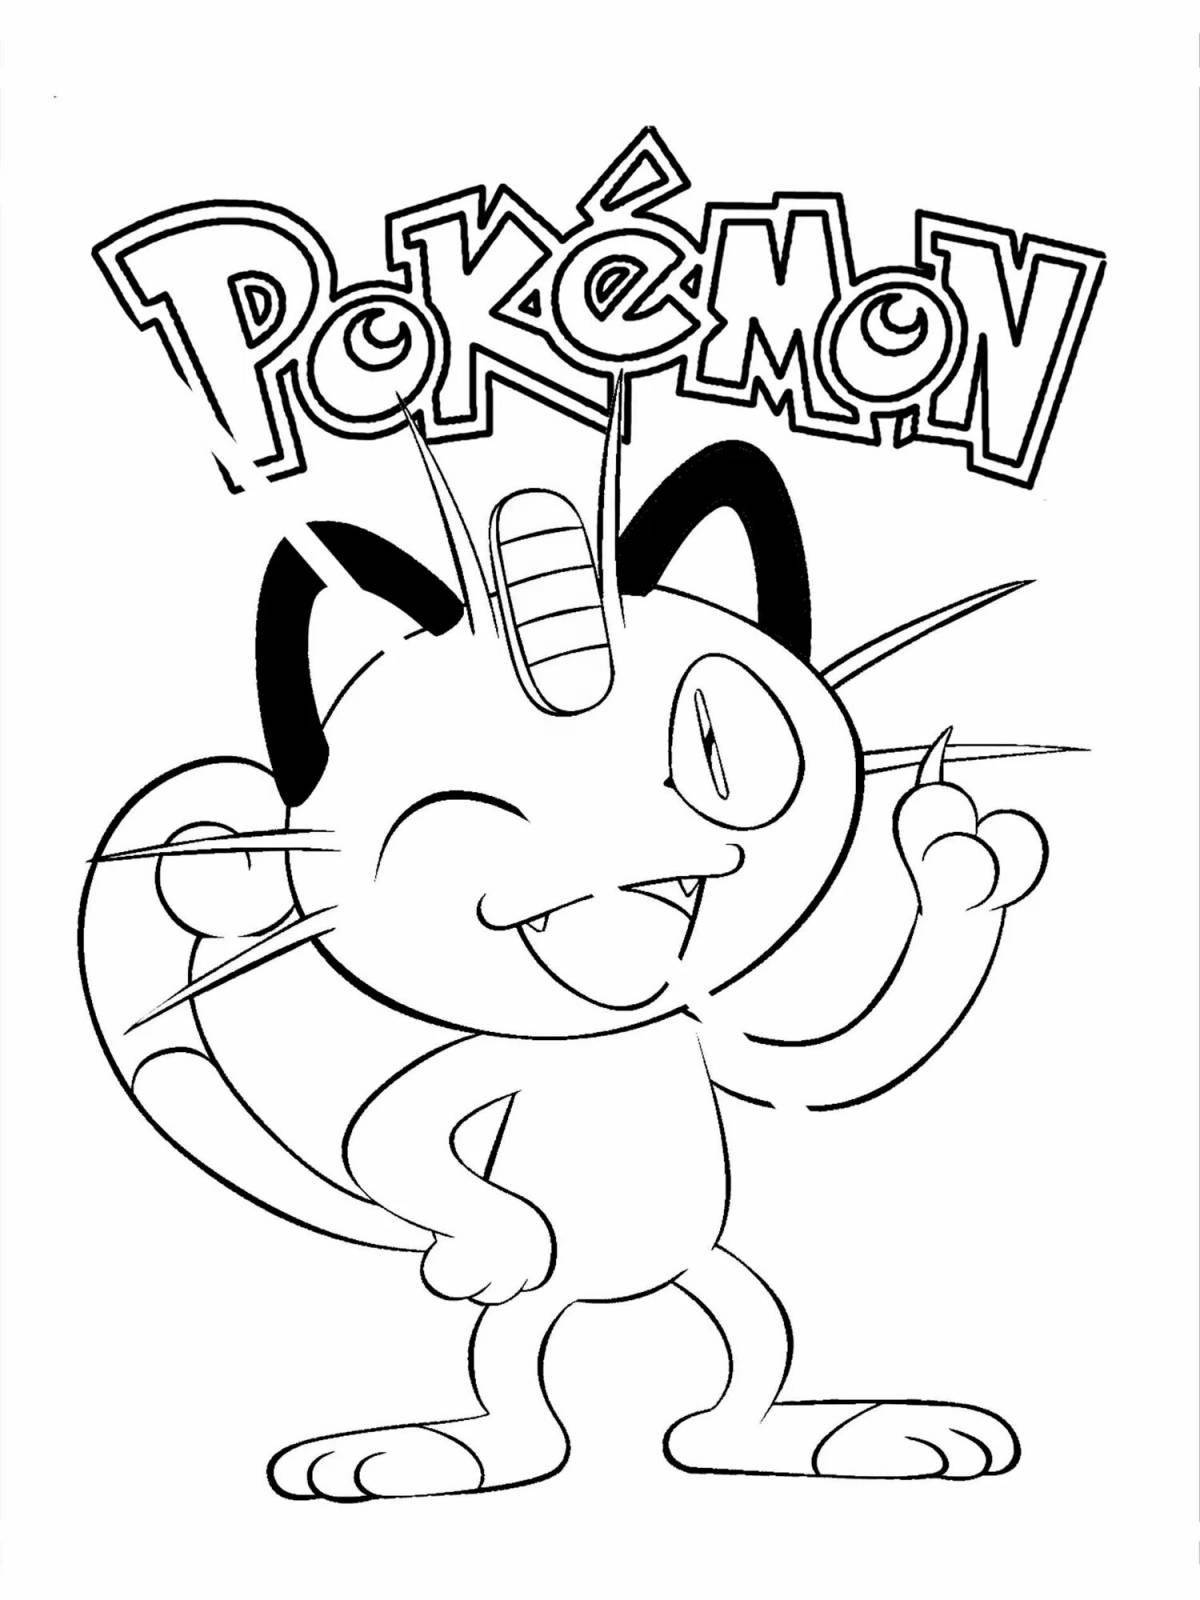 Coloring lively meowth